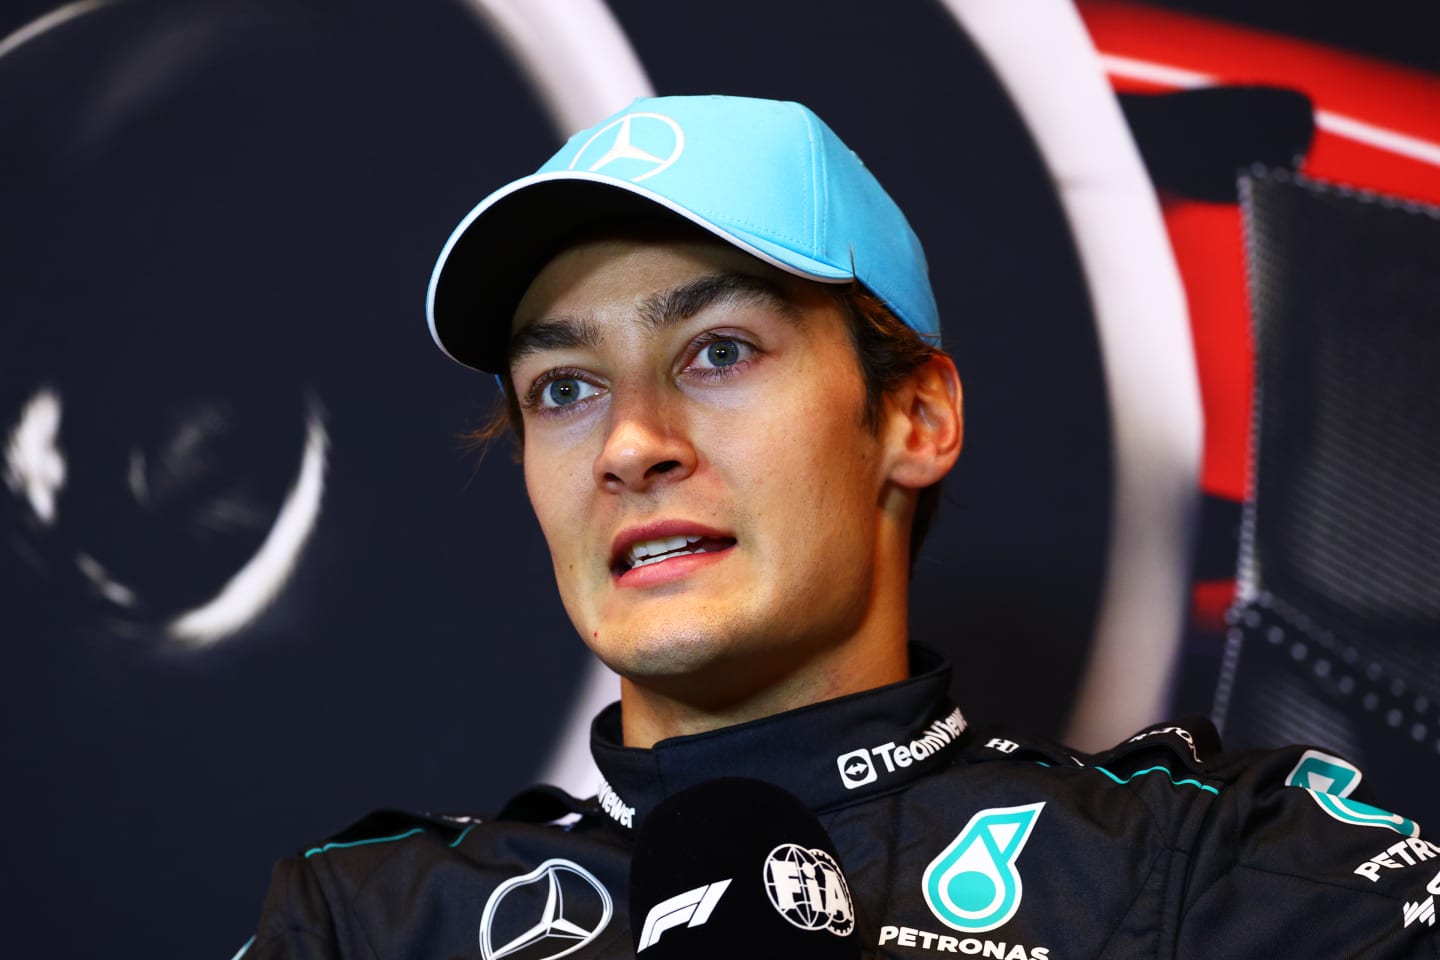 MONTREAL, QUEBEC - JUNE 09: Third placed George Russell of Great Britain and Mercedes attends the press conference after the F1 Grand Prix of Canada at Circuit Gilles Villeneuve on June 09, 2024 in Montreal, Quebec. (Photo by Clive Rose/Getty Images)